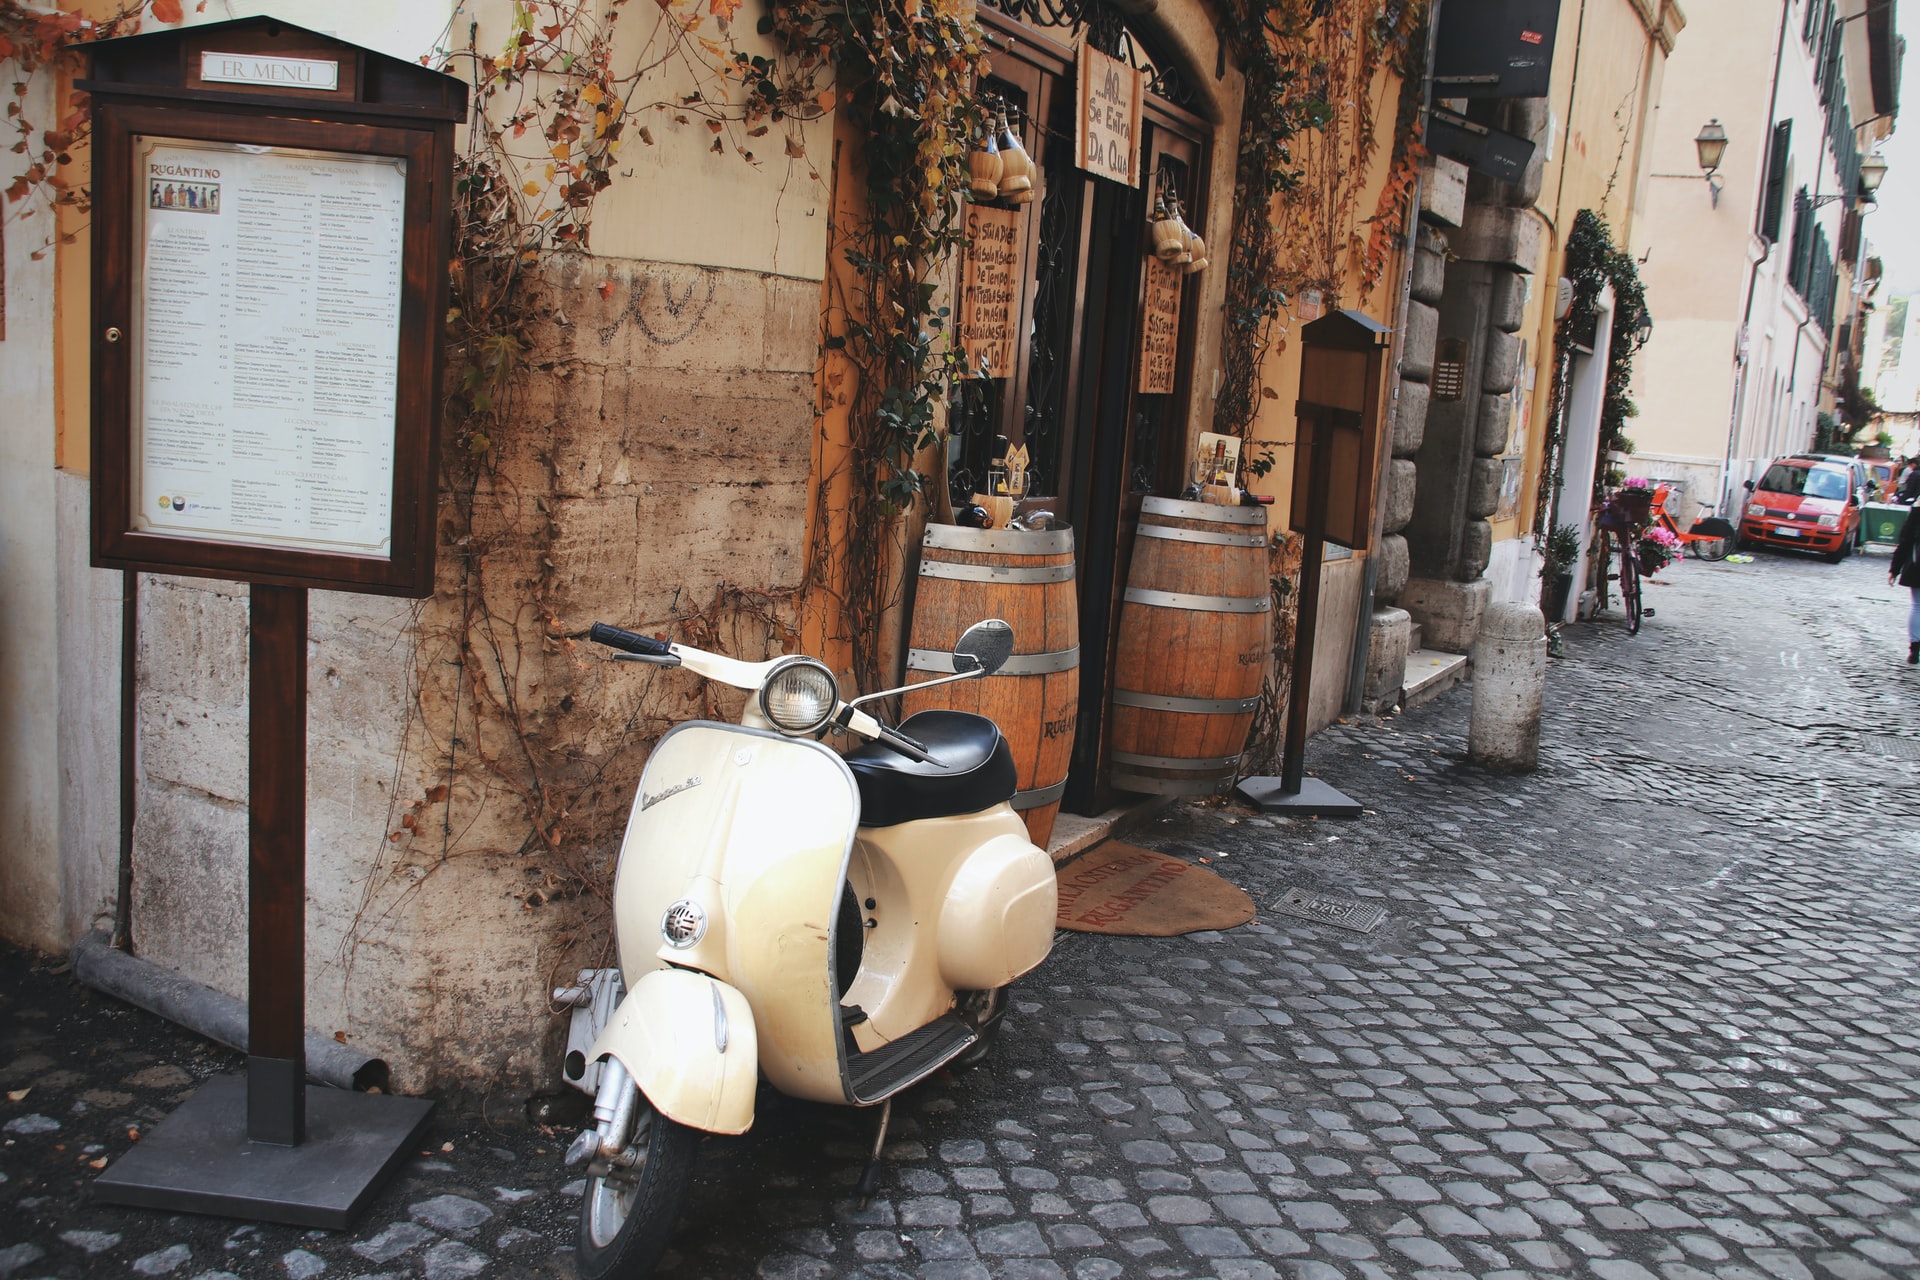 <p>If you want to feel like Audrey Hepburn and Gregory Peck, we recommend you do this Vespa sidecar tour. You will be driving through the Historic Center of Rome and visiting the Piazza della Repubblica, the Trevi Fountain, Saint Peter's square, and the Trastevere neighborhood.</p> <p>Image: Unsplash - Iga Palacz</p>